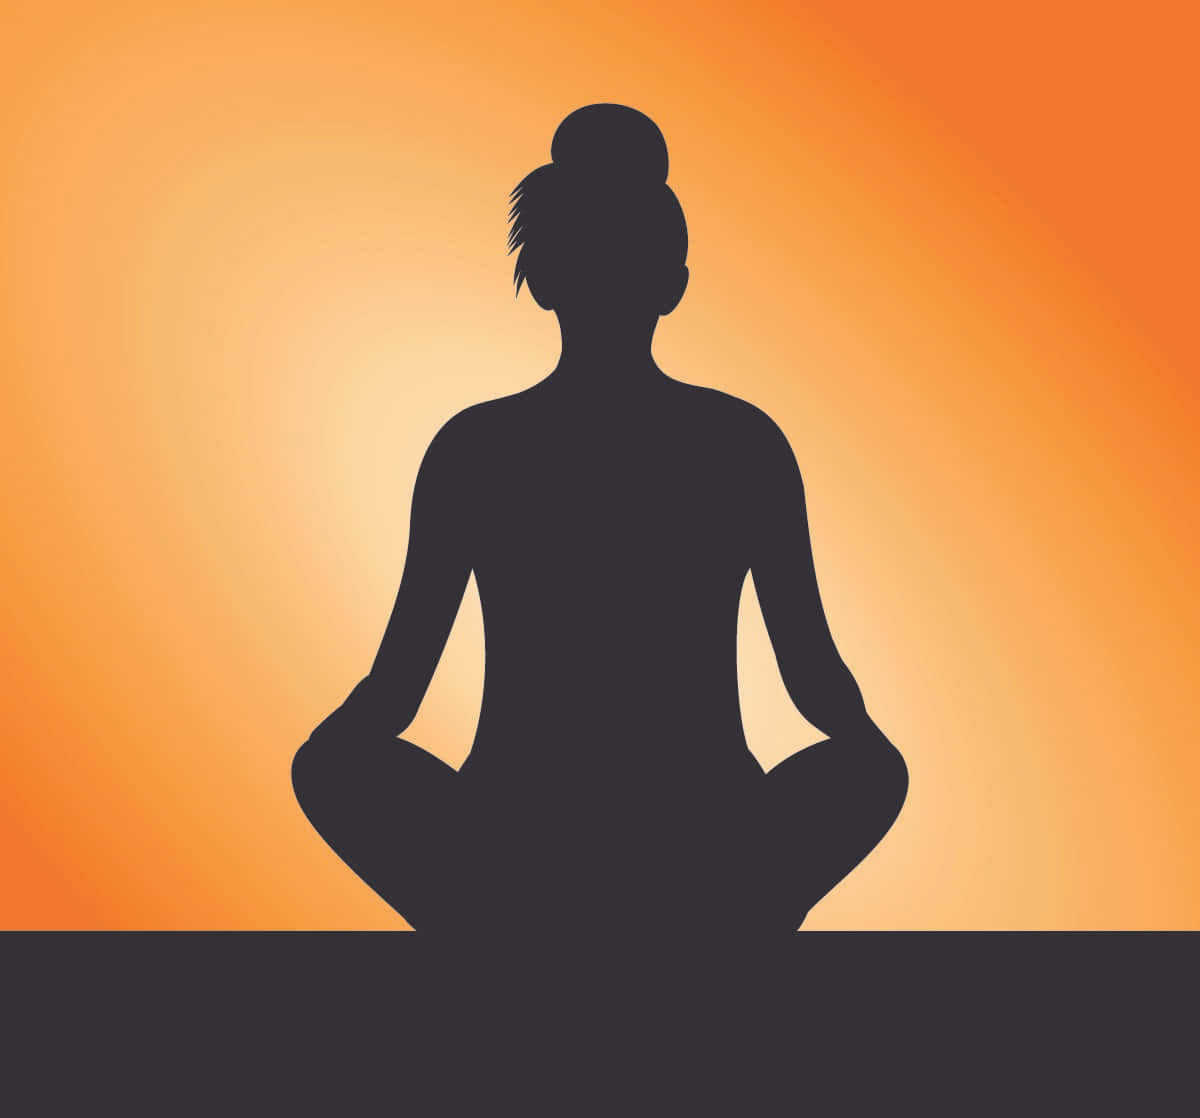 A Silhouette Of A Woman Meditating On An Orange Background